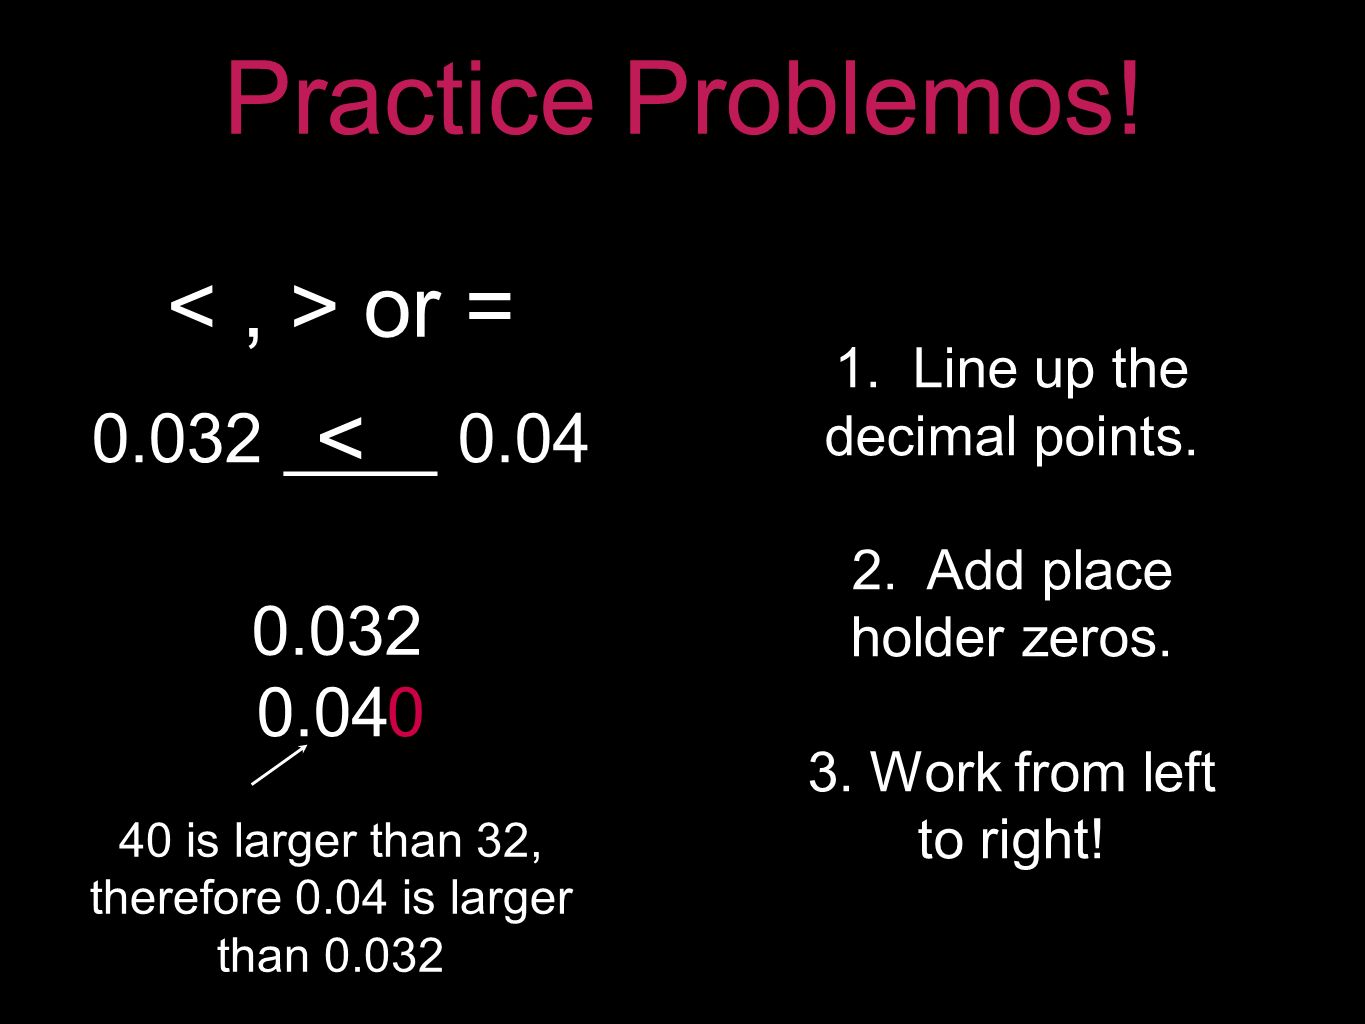 Practice Problemos ____ 0.04 or = 1. Line up the decimal points.